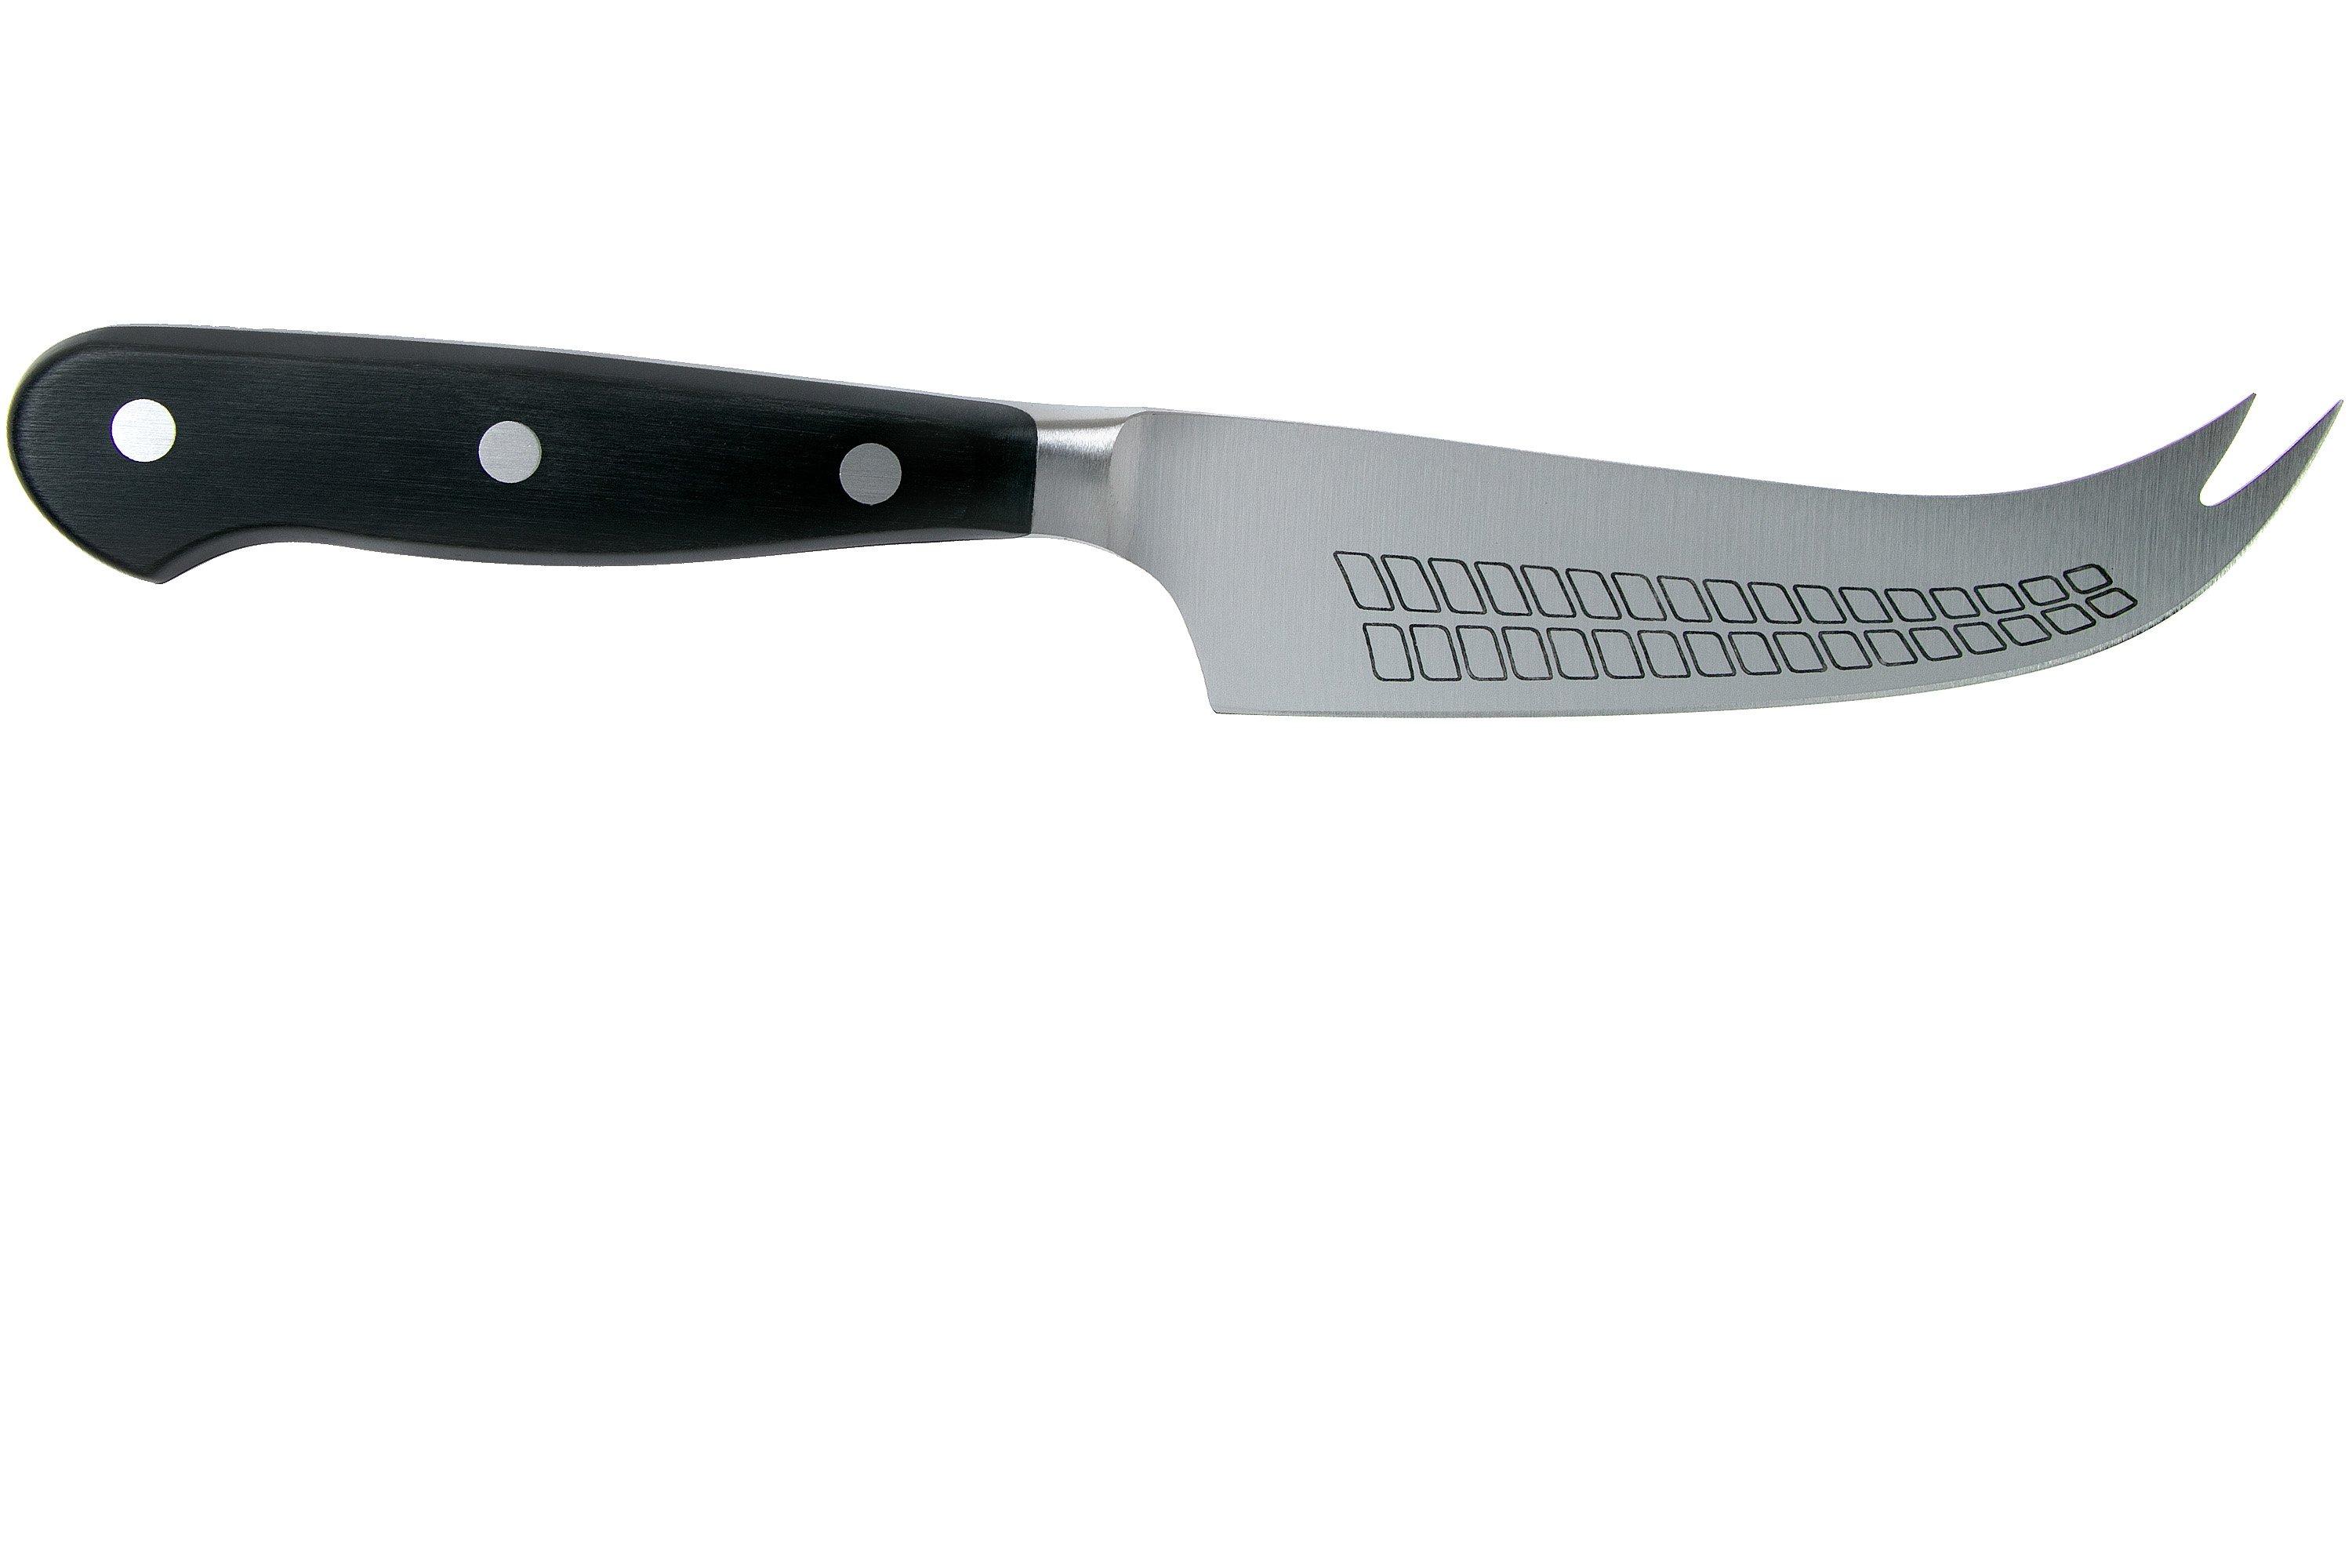 Classic Hard Cheese Knife 14 cm  5 inch - WÜSTHOF - Official Online Store